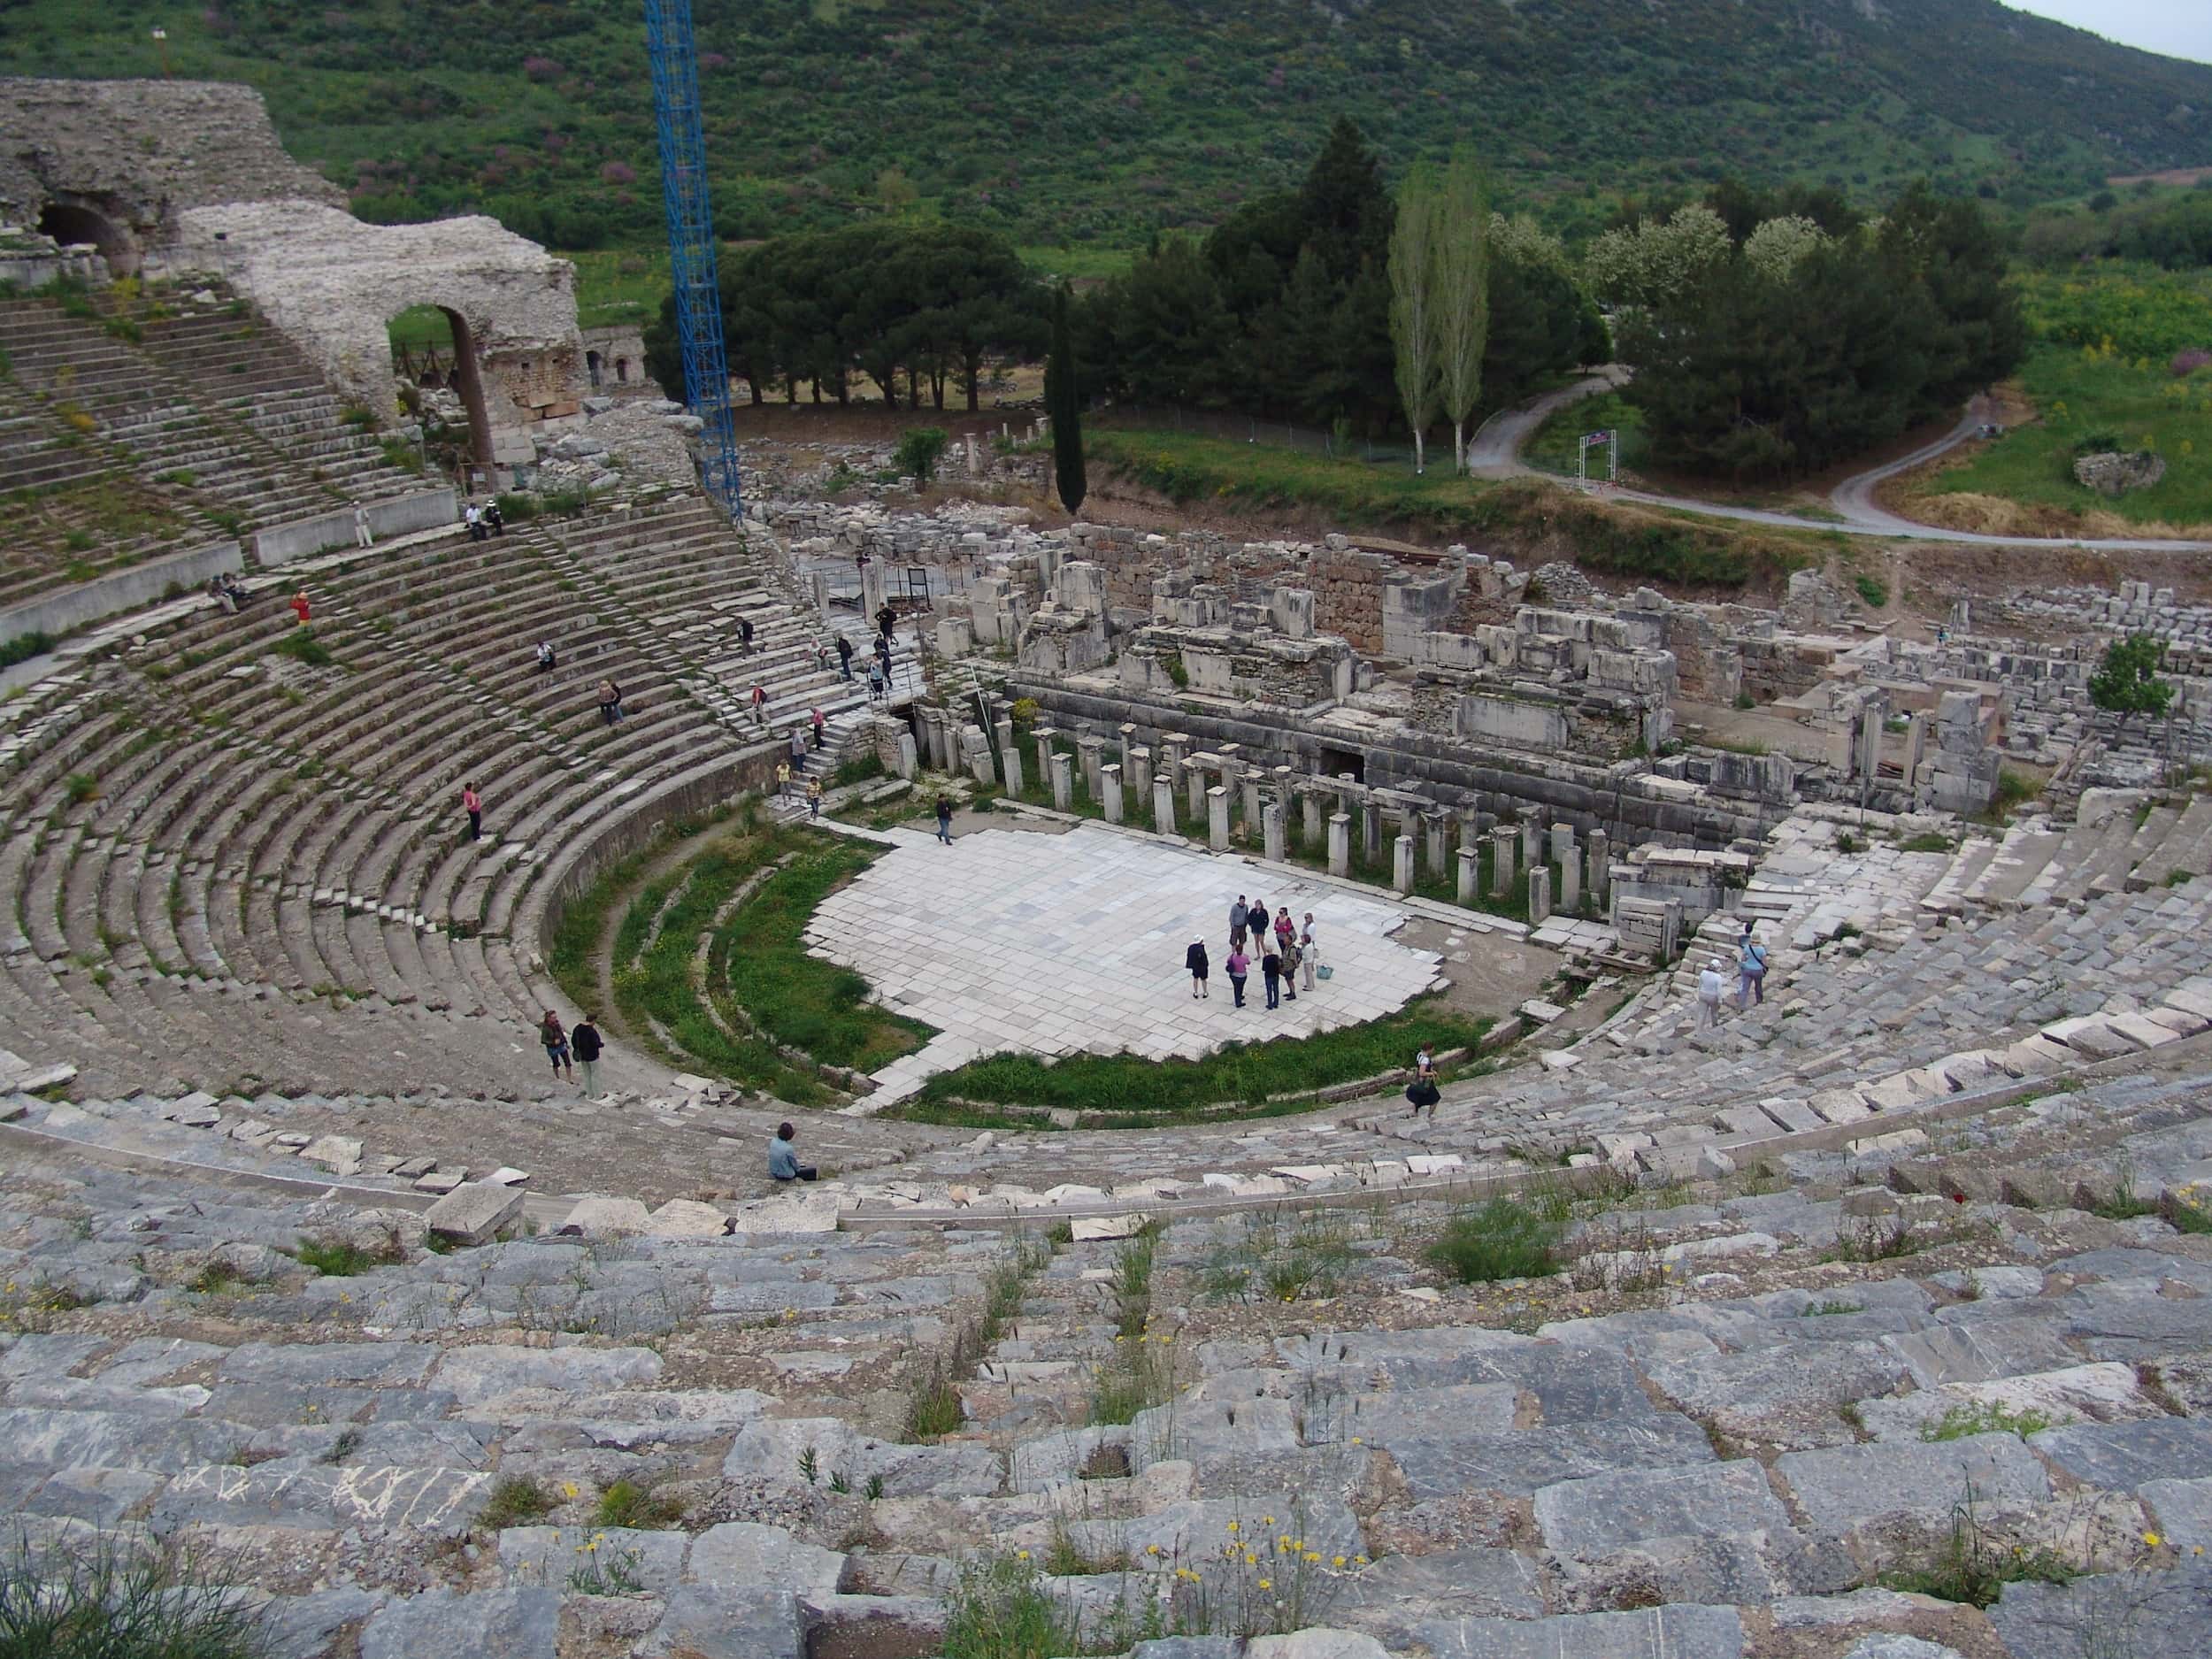 View from the top of the seating area at the Great Theatre of Ephesus